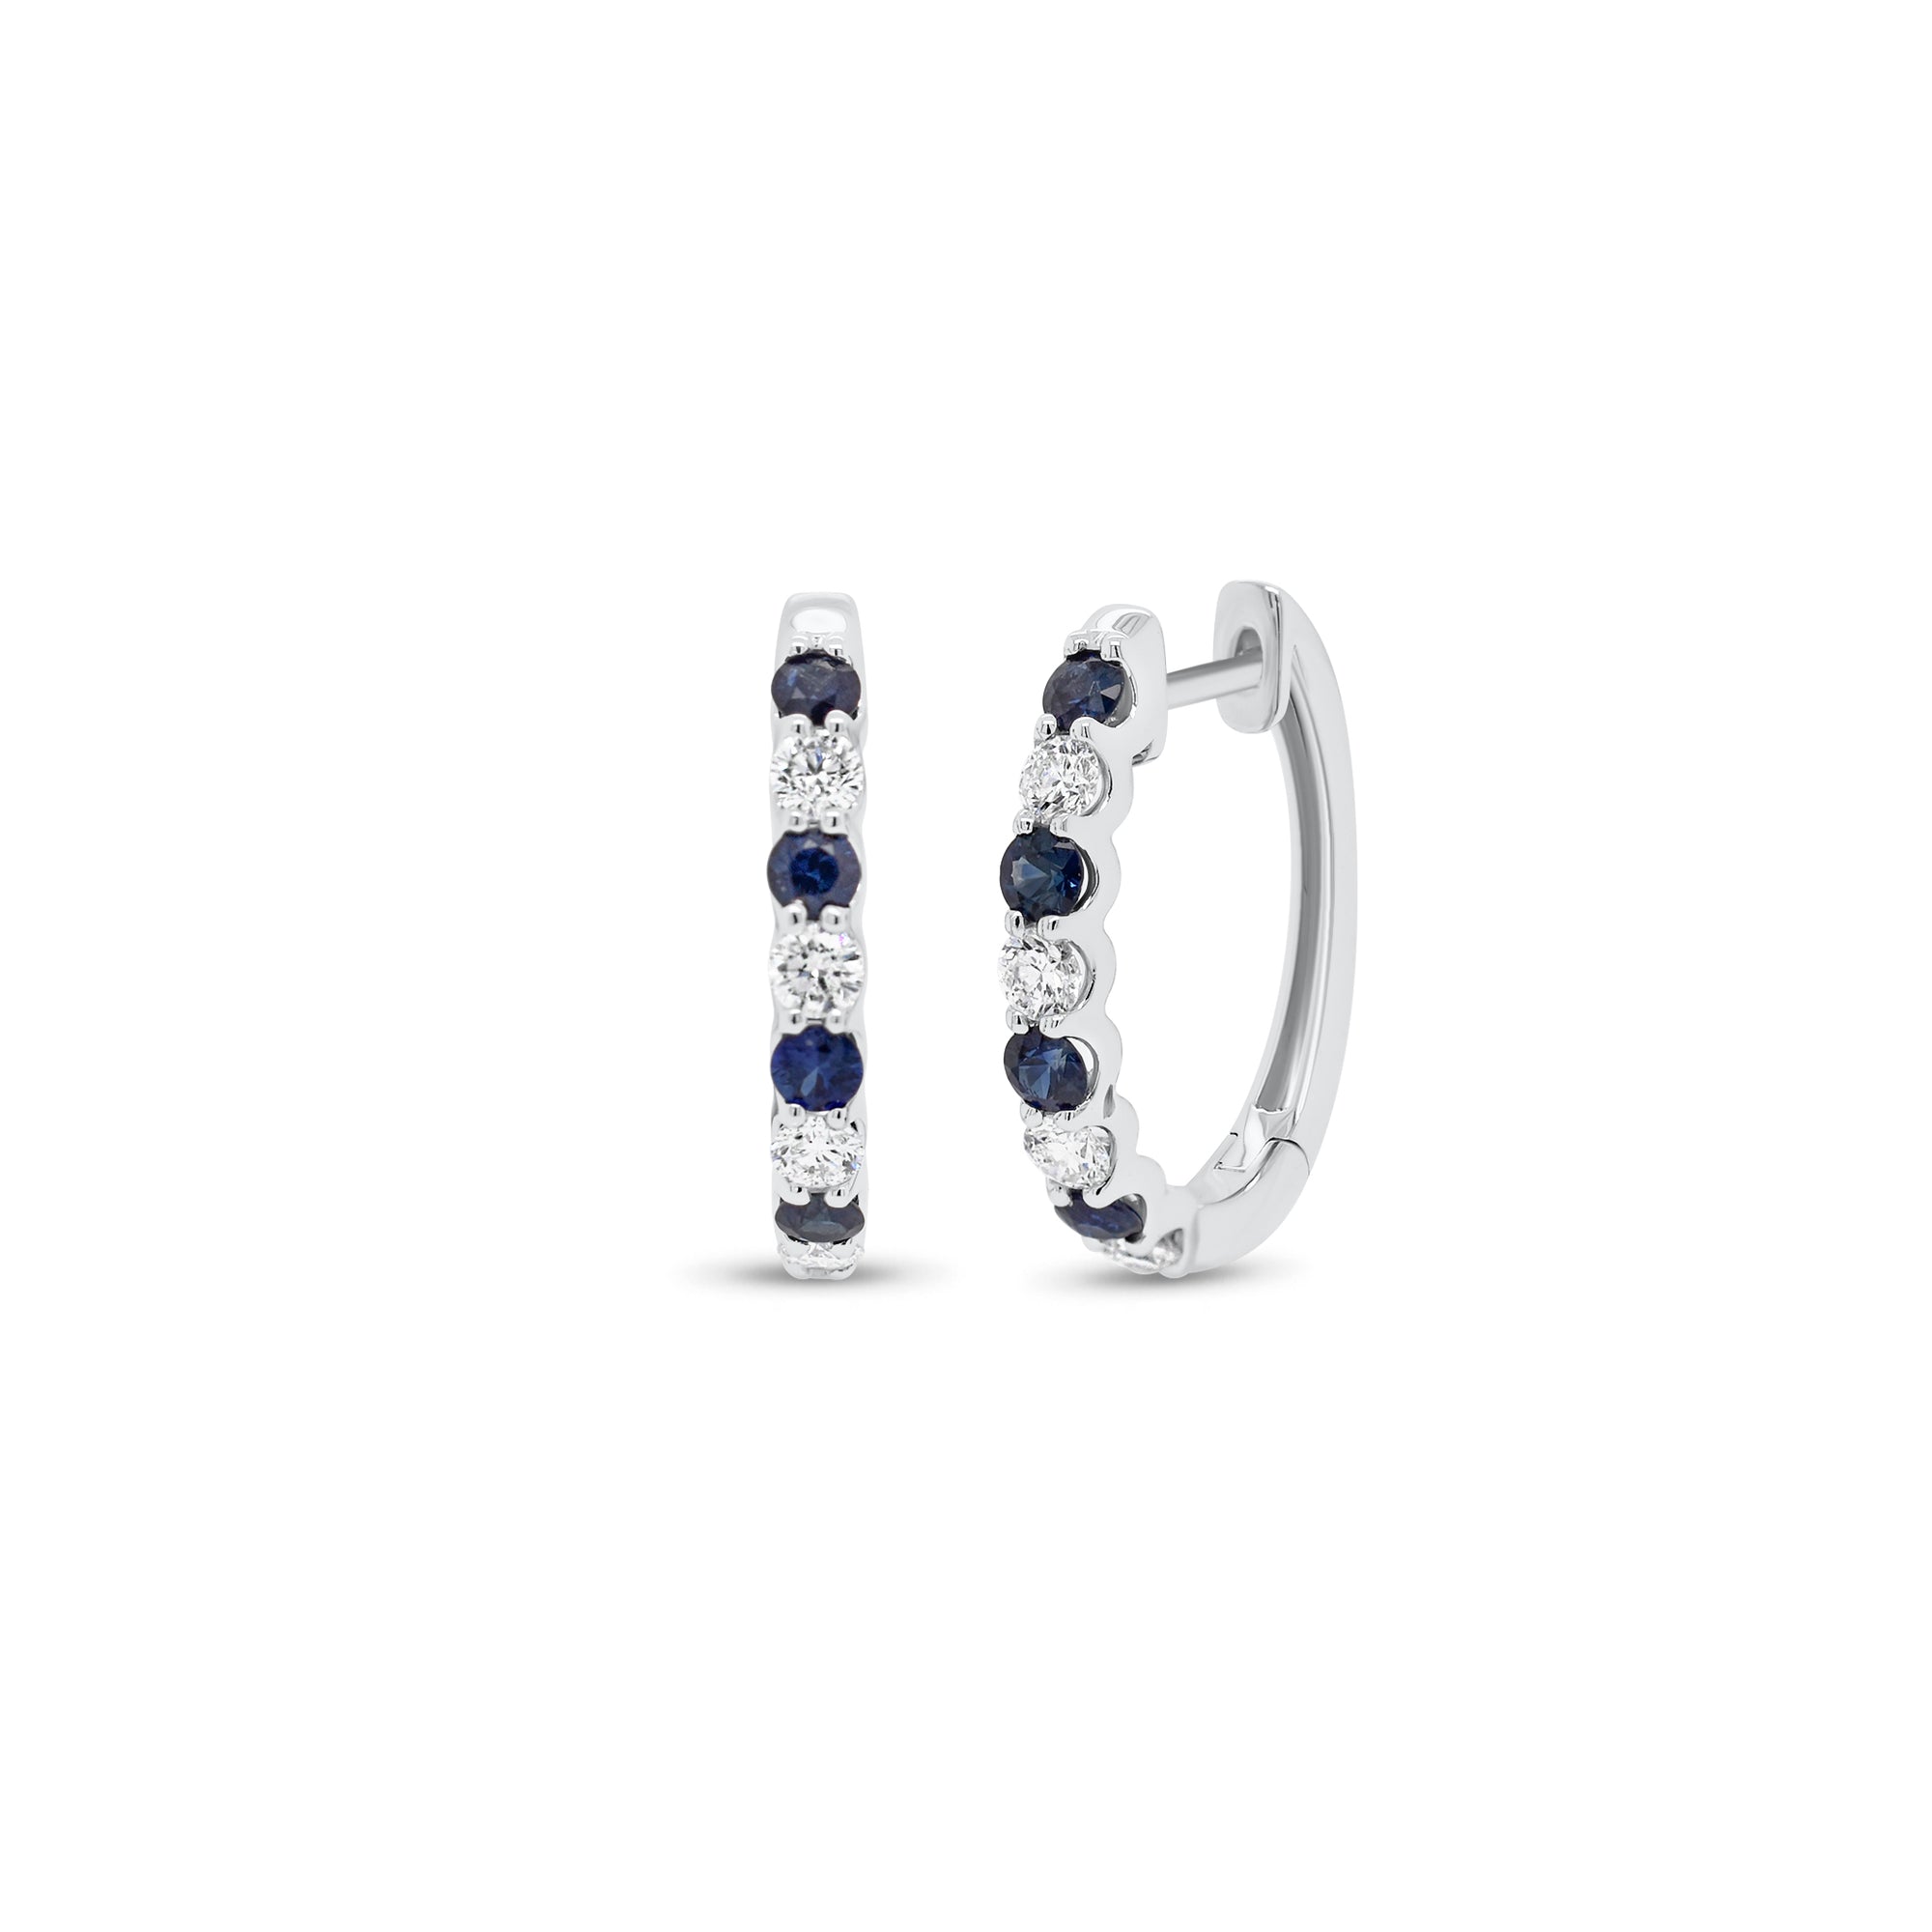 Sapphire & Diamond Huggie Earrings - 18K gold weighing 2.84 grams  - 8 round diamonds weighing 0.37 carats  - 8 sapphires weighing 0.43 carats